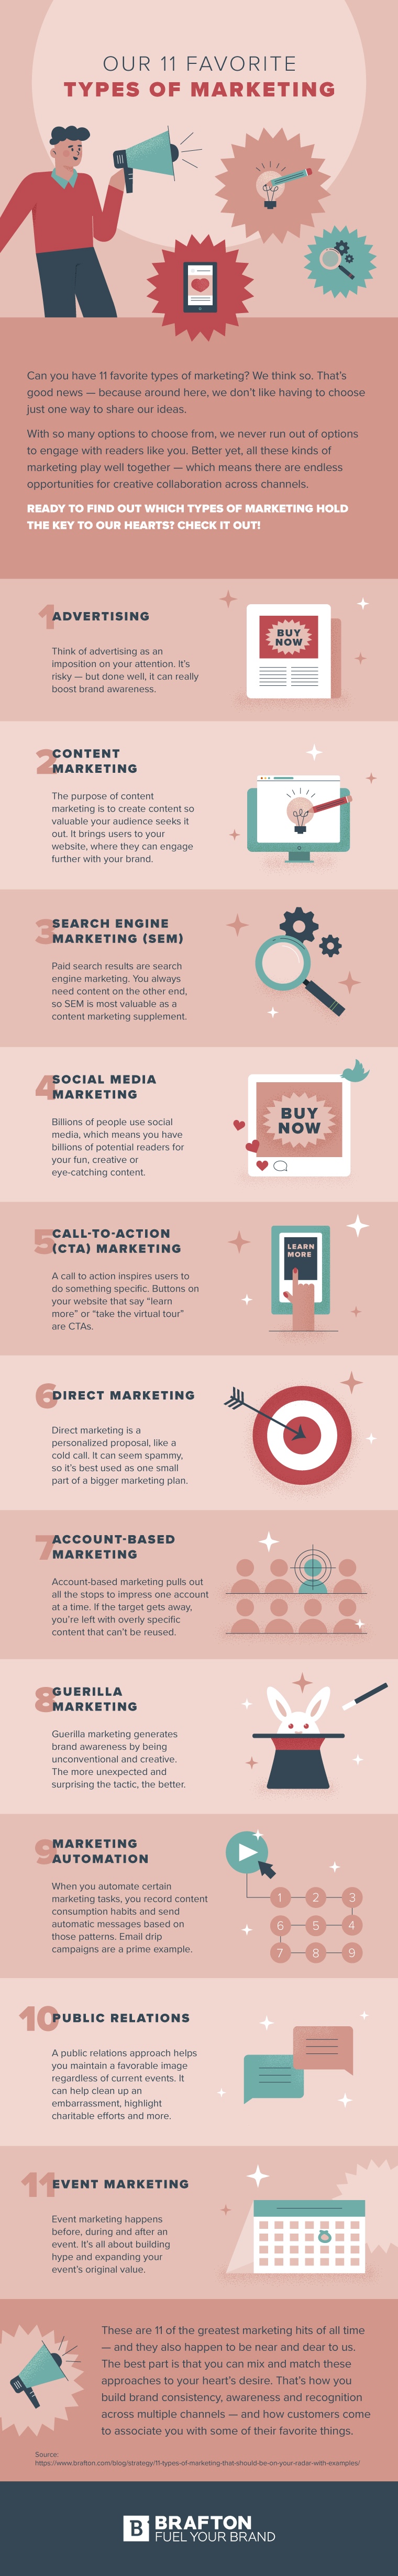 Our 11 favorite types of marketing infographic by Brafton